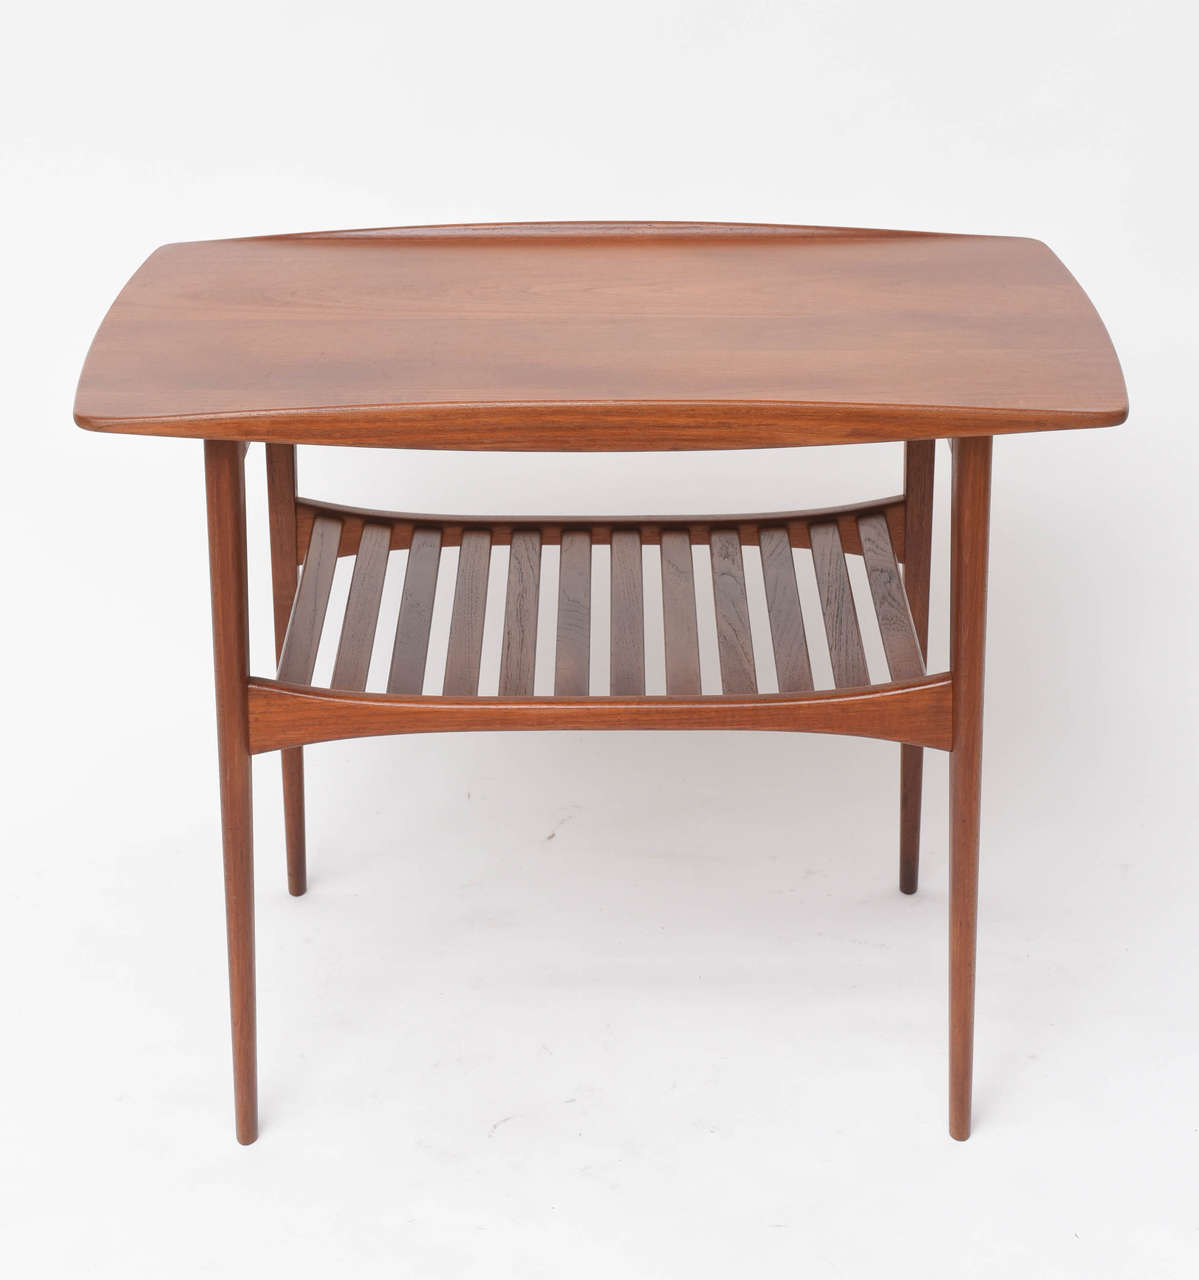 Pair of Danish modern end tables by Tove and Edward Kindt-Larsen for John Stuart. Solid teakwood with curved sides and slatted lower shelves.